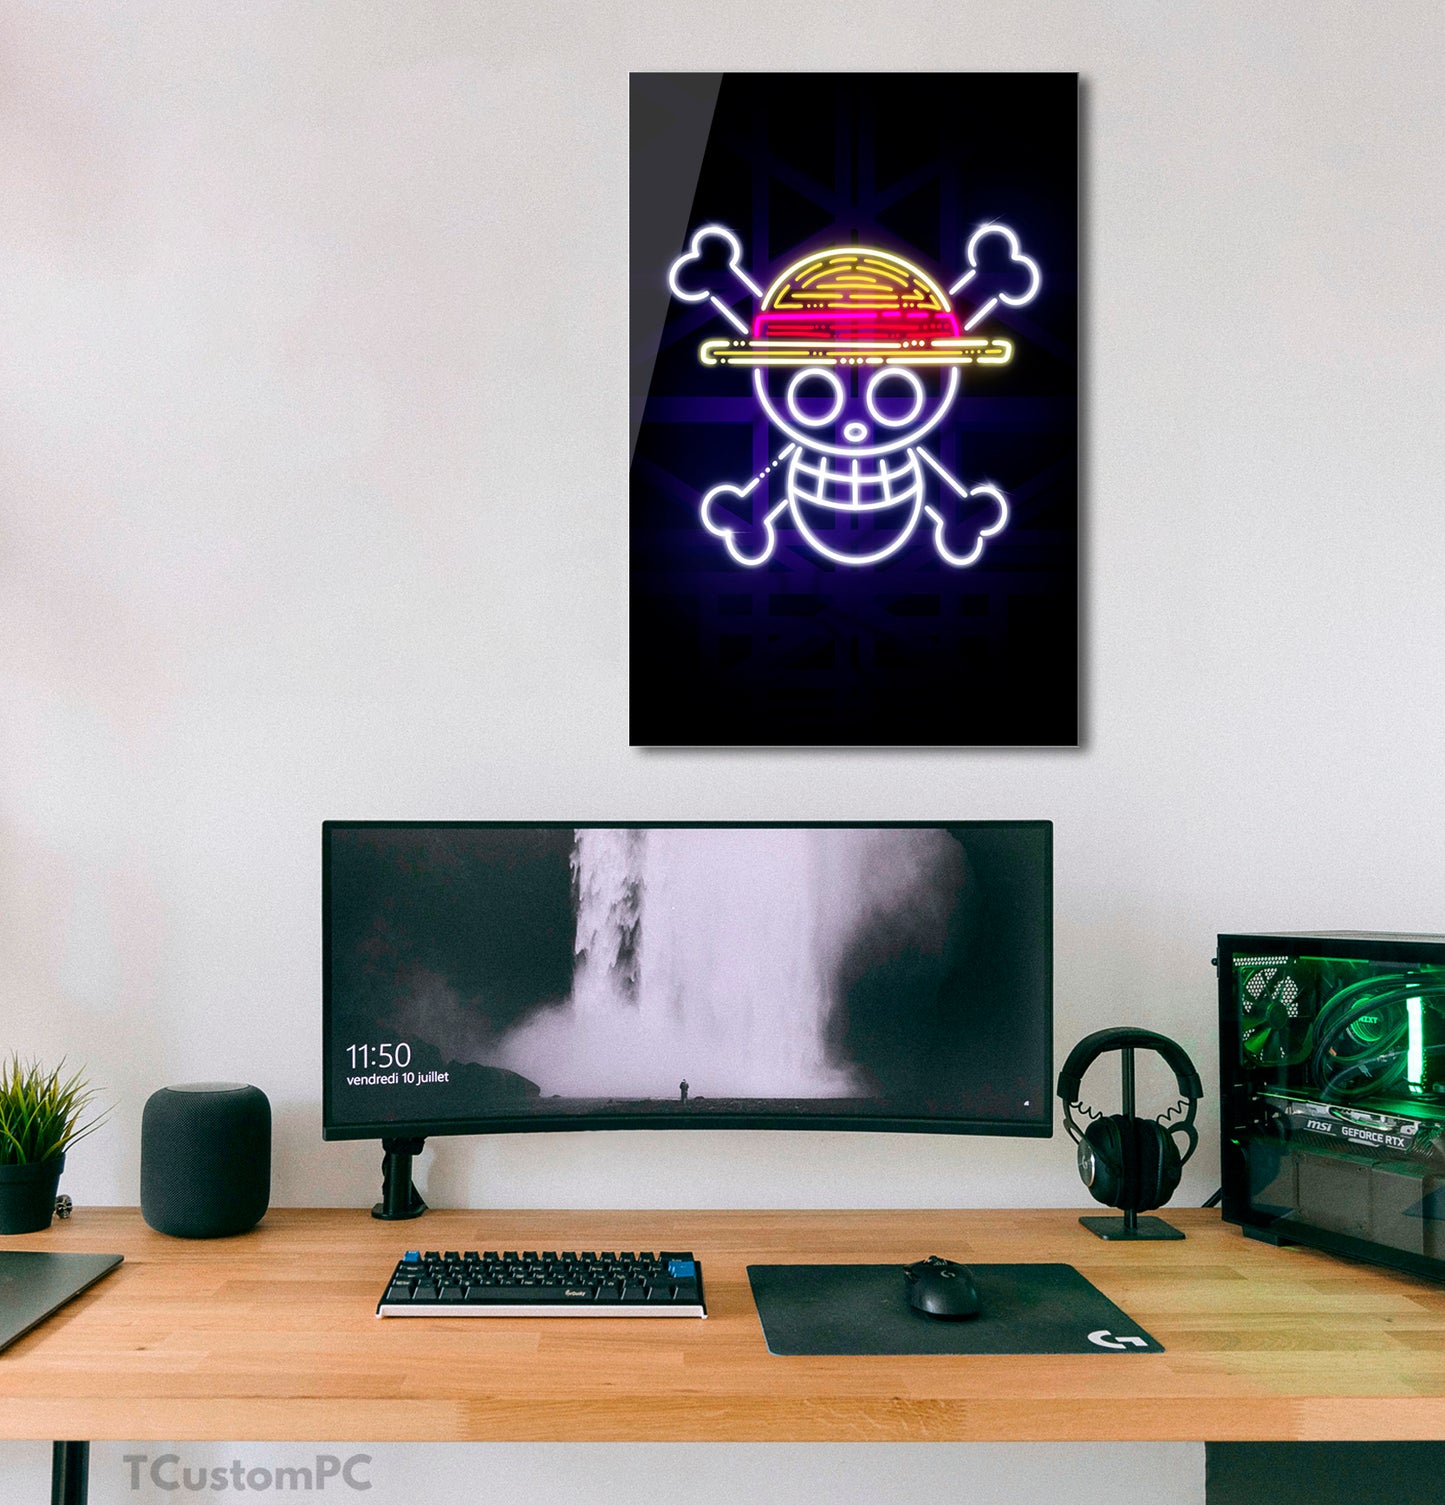 Strawhat Pirate painting